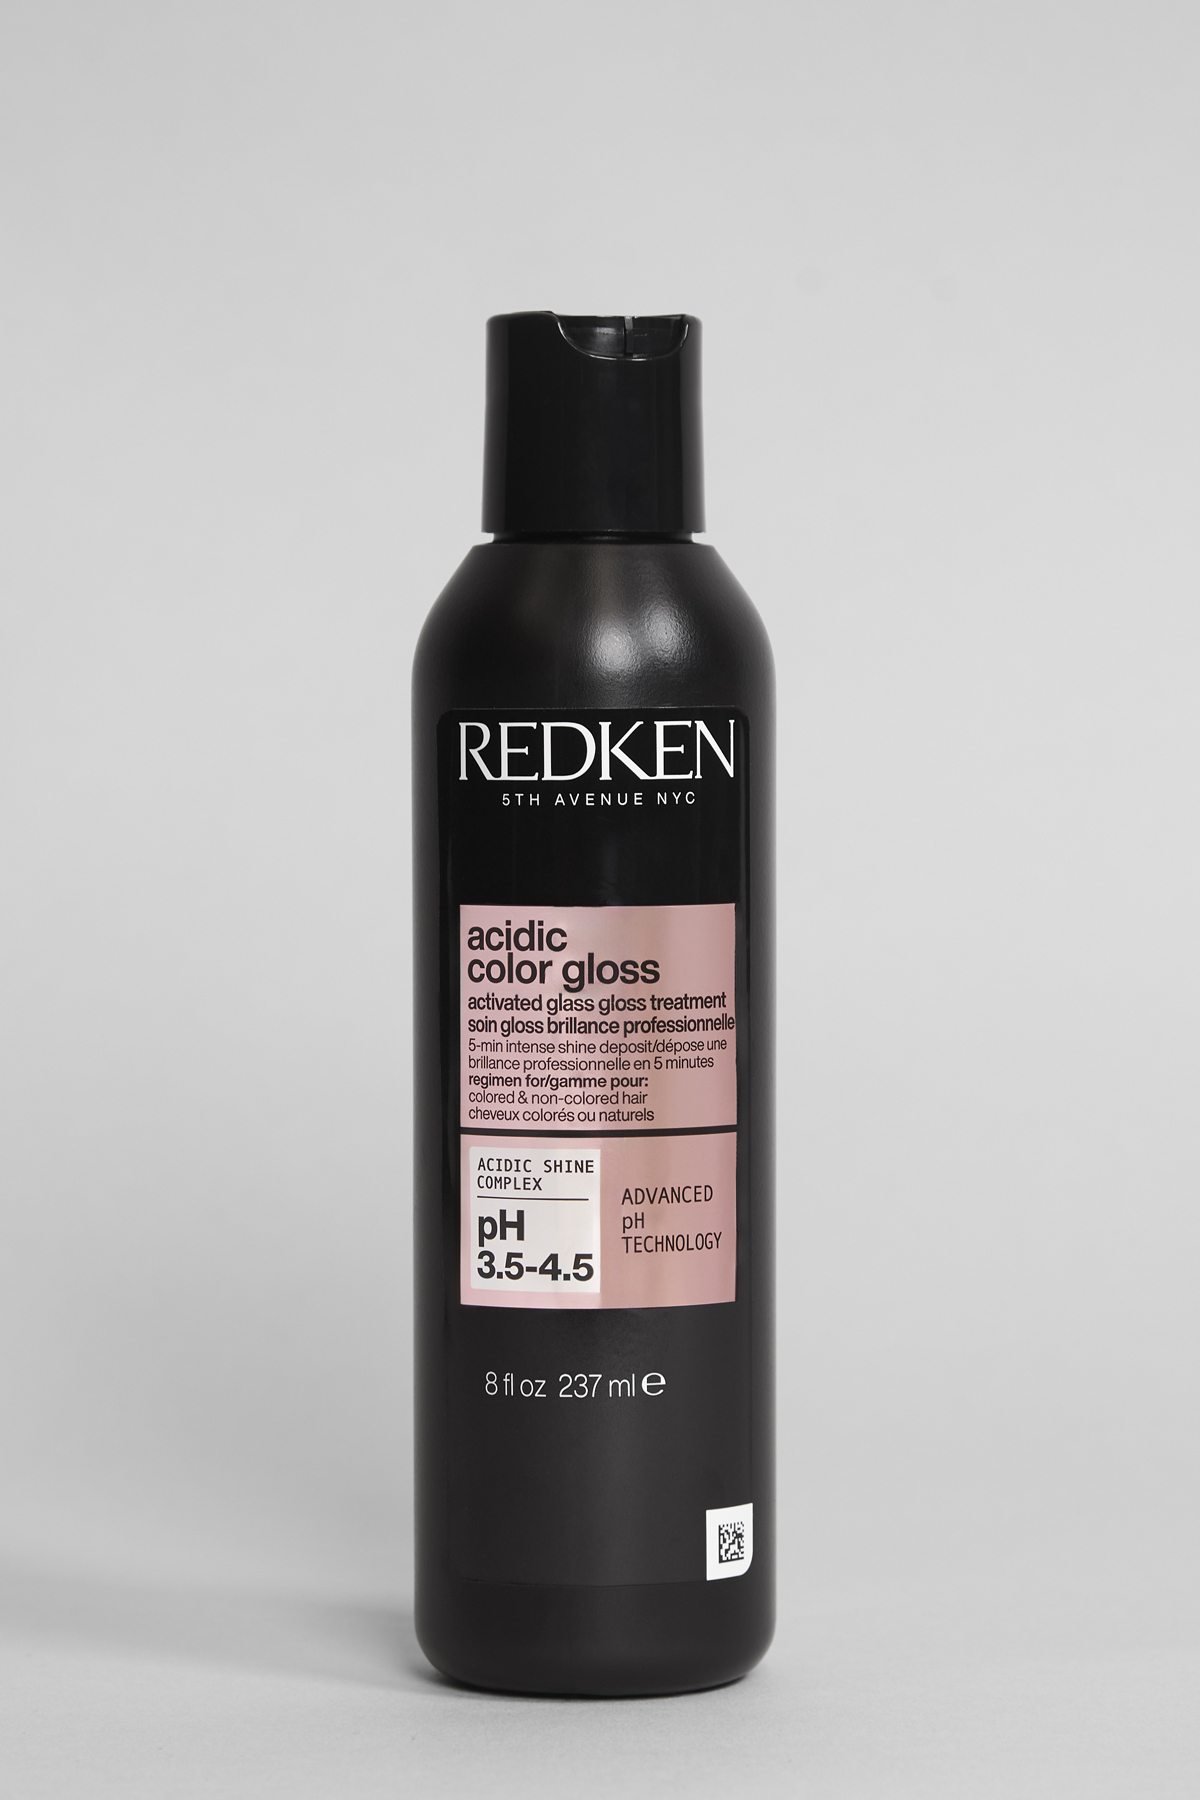 Redken Acidic Color Gloss Activated Glass Gloss Treatment shot in Marie Claire